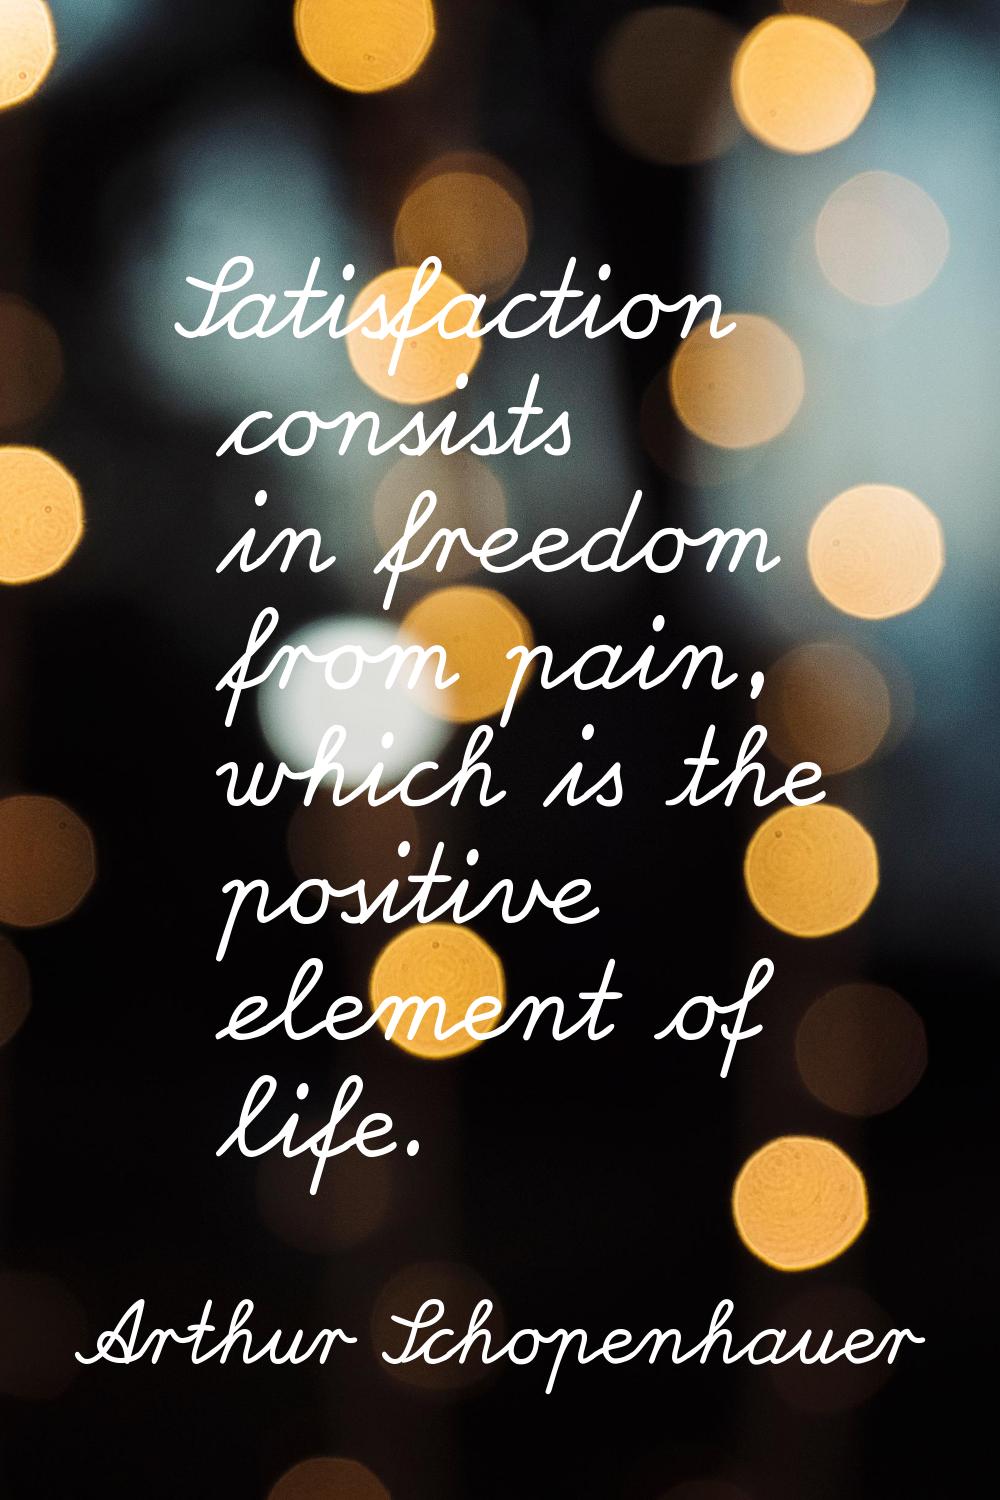 Satisfaction consists in freedom from pain, which is the positive element of life.